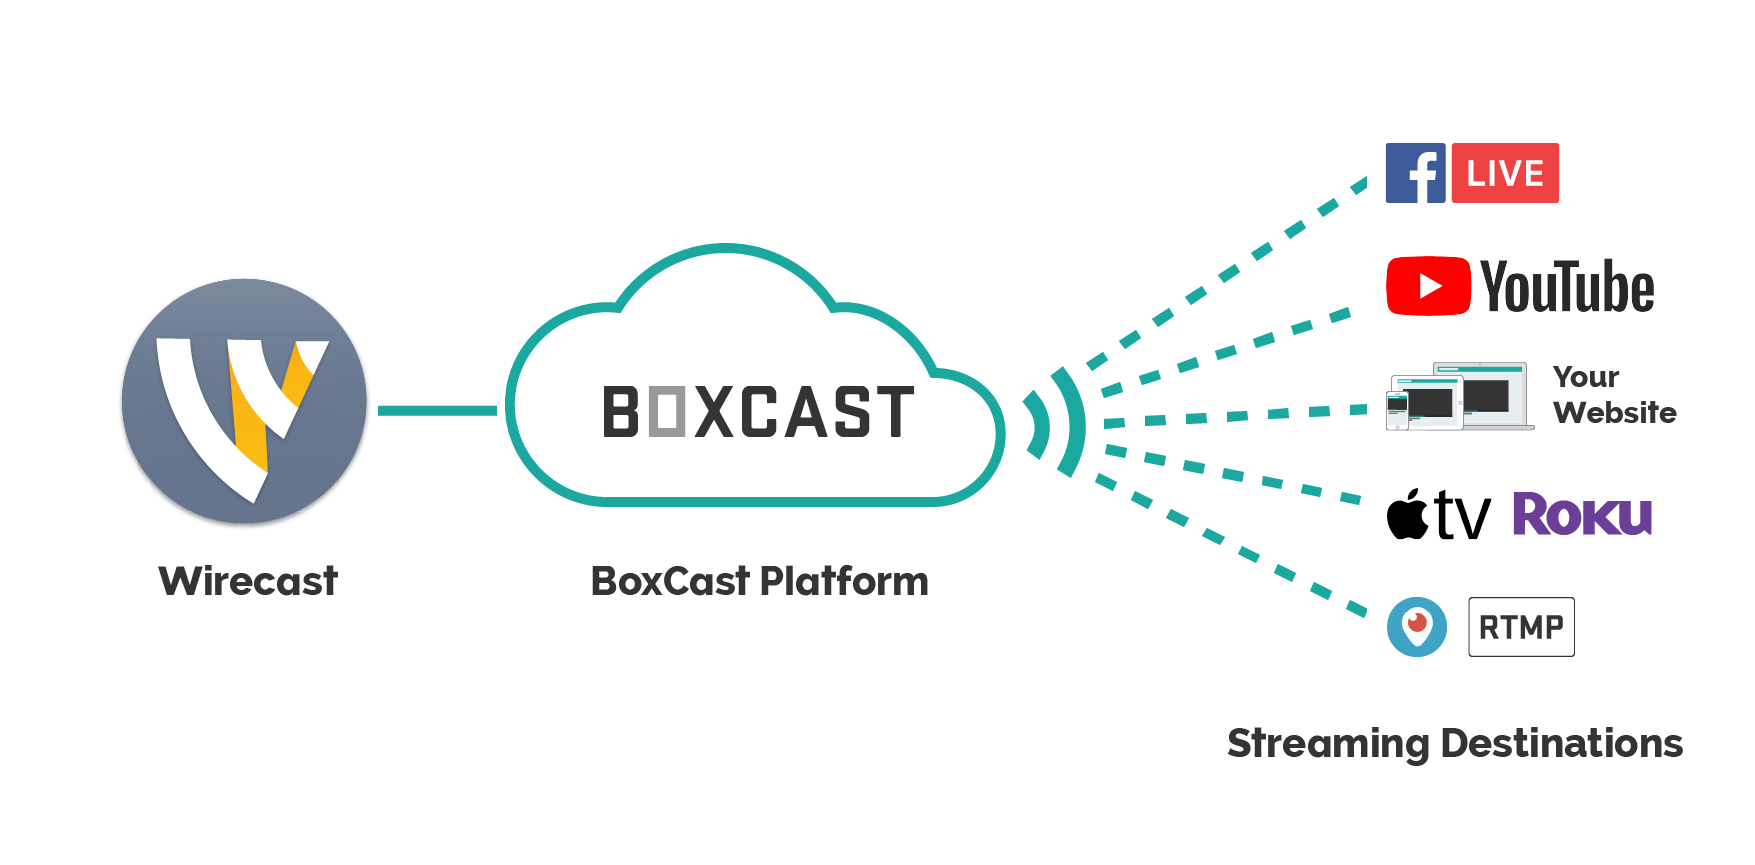 BoxCast integrates with Wirecast for simple, high-quality live webcasts